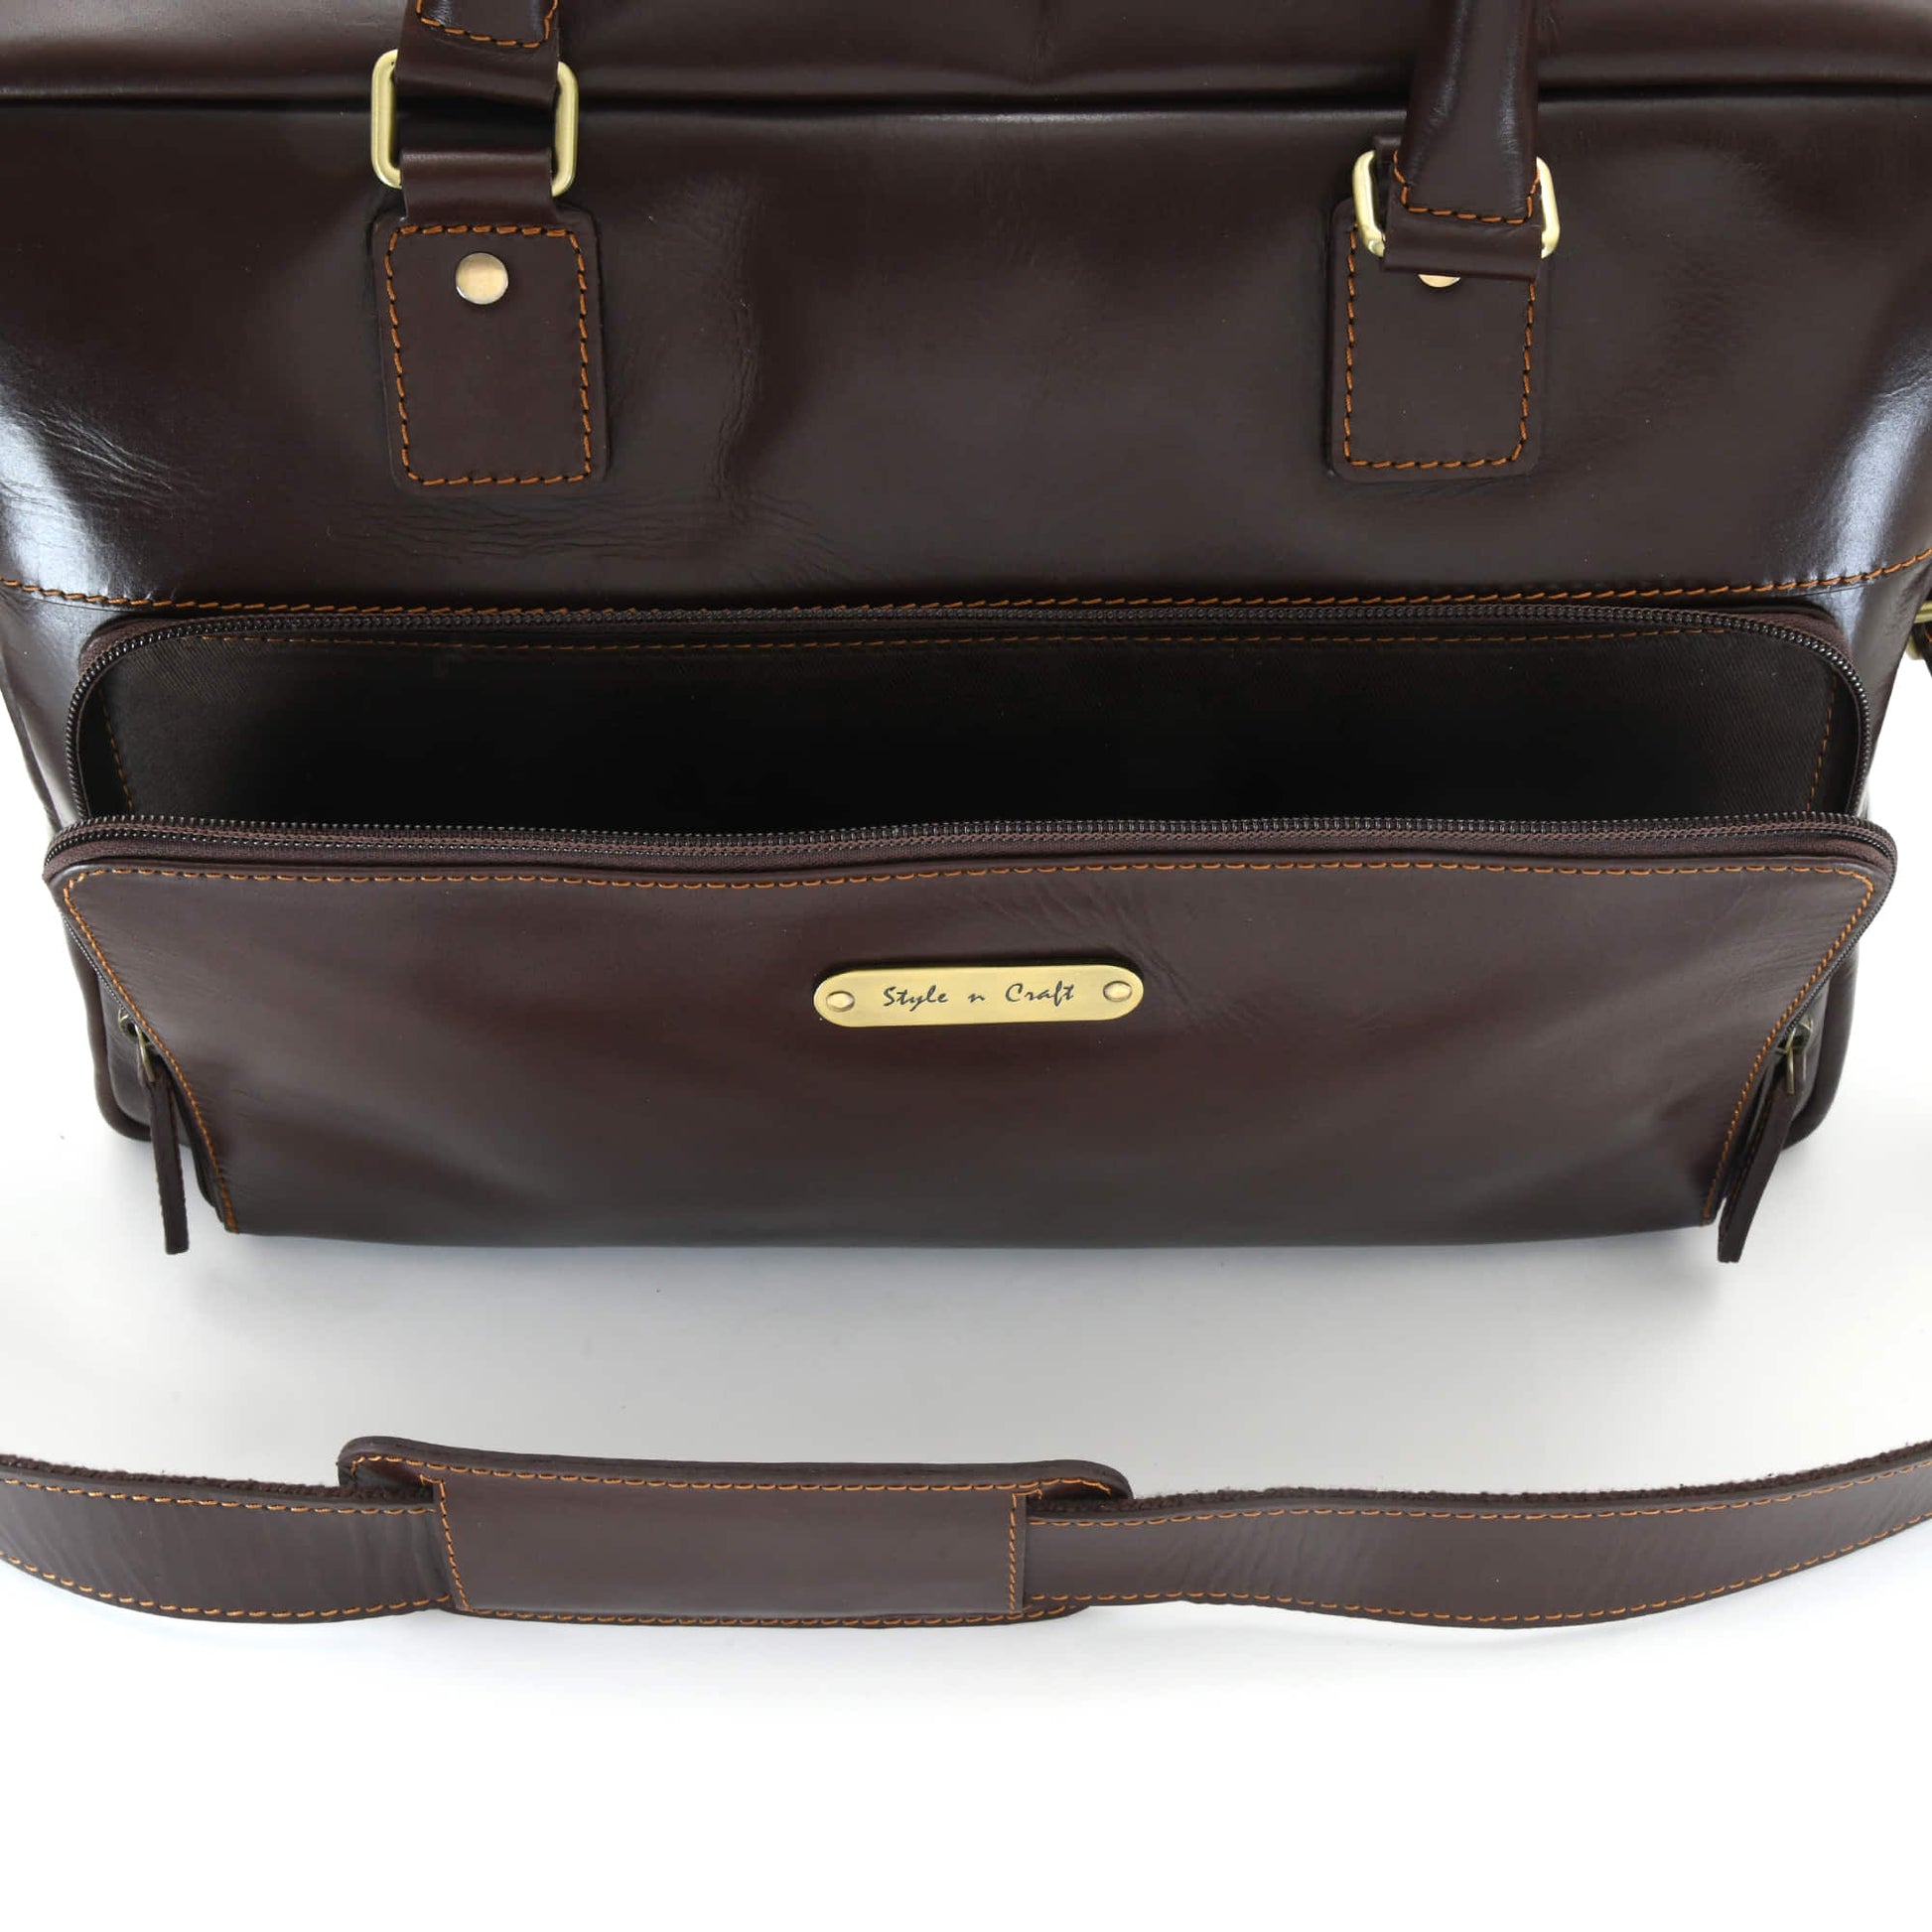 Style n Craft 392009 Men's Portfolio Briefcase Bag in Full Grain Dark Brown Leather - Front  View showing the Opening of the External Zippered Pocket